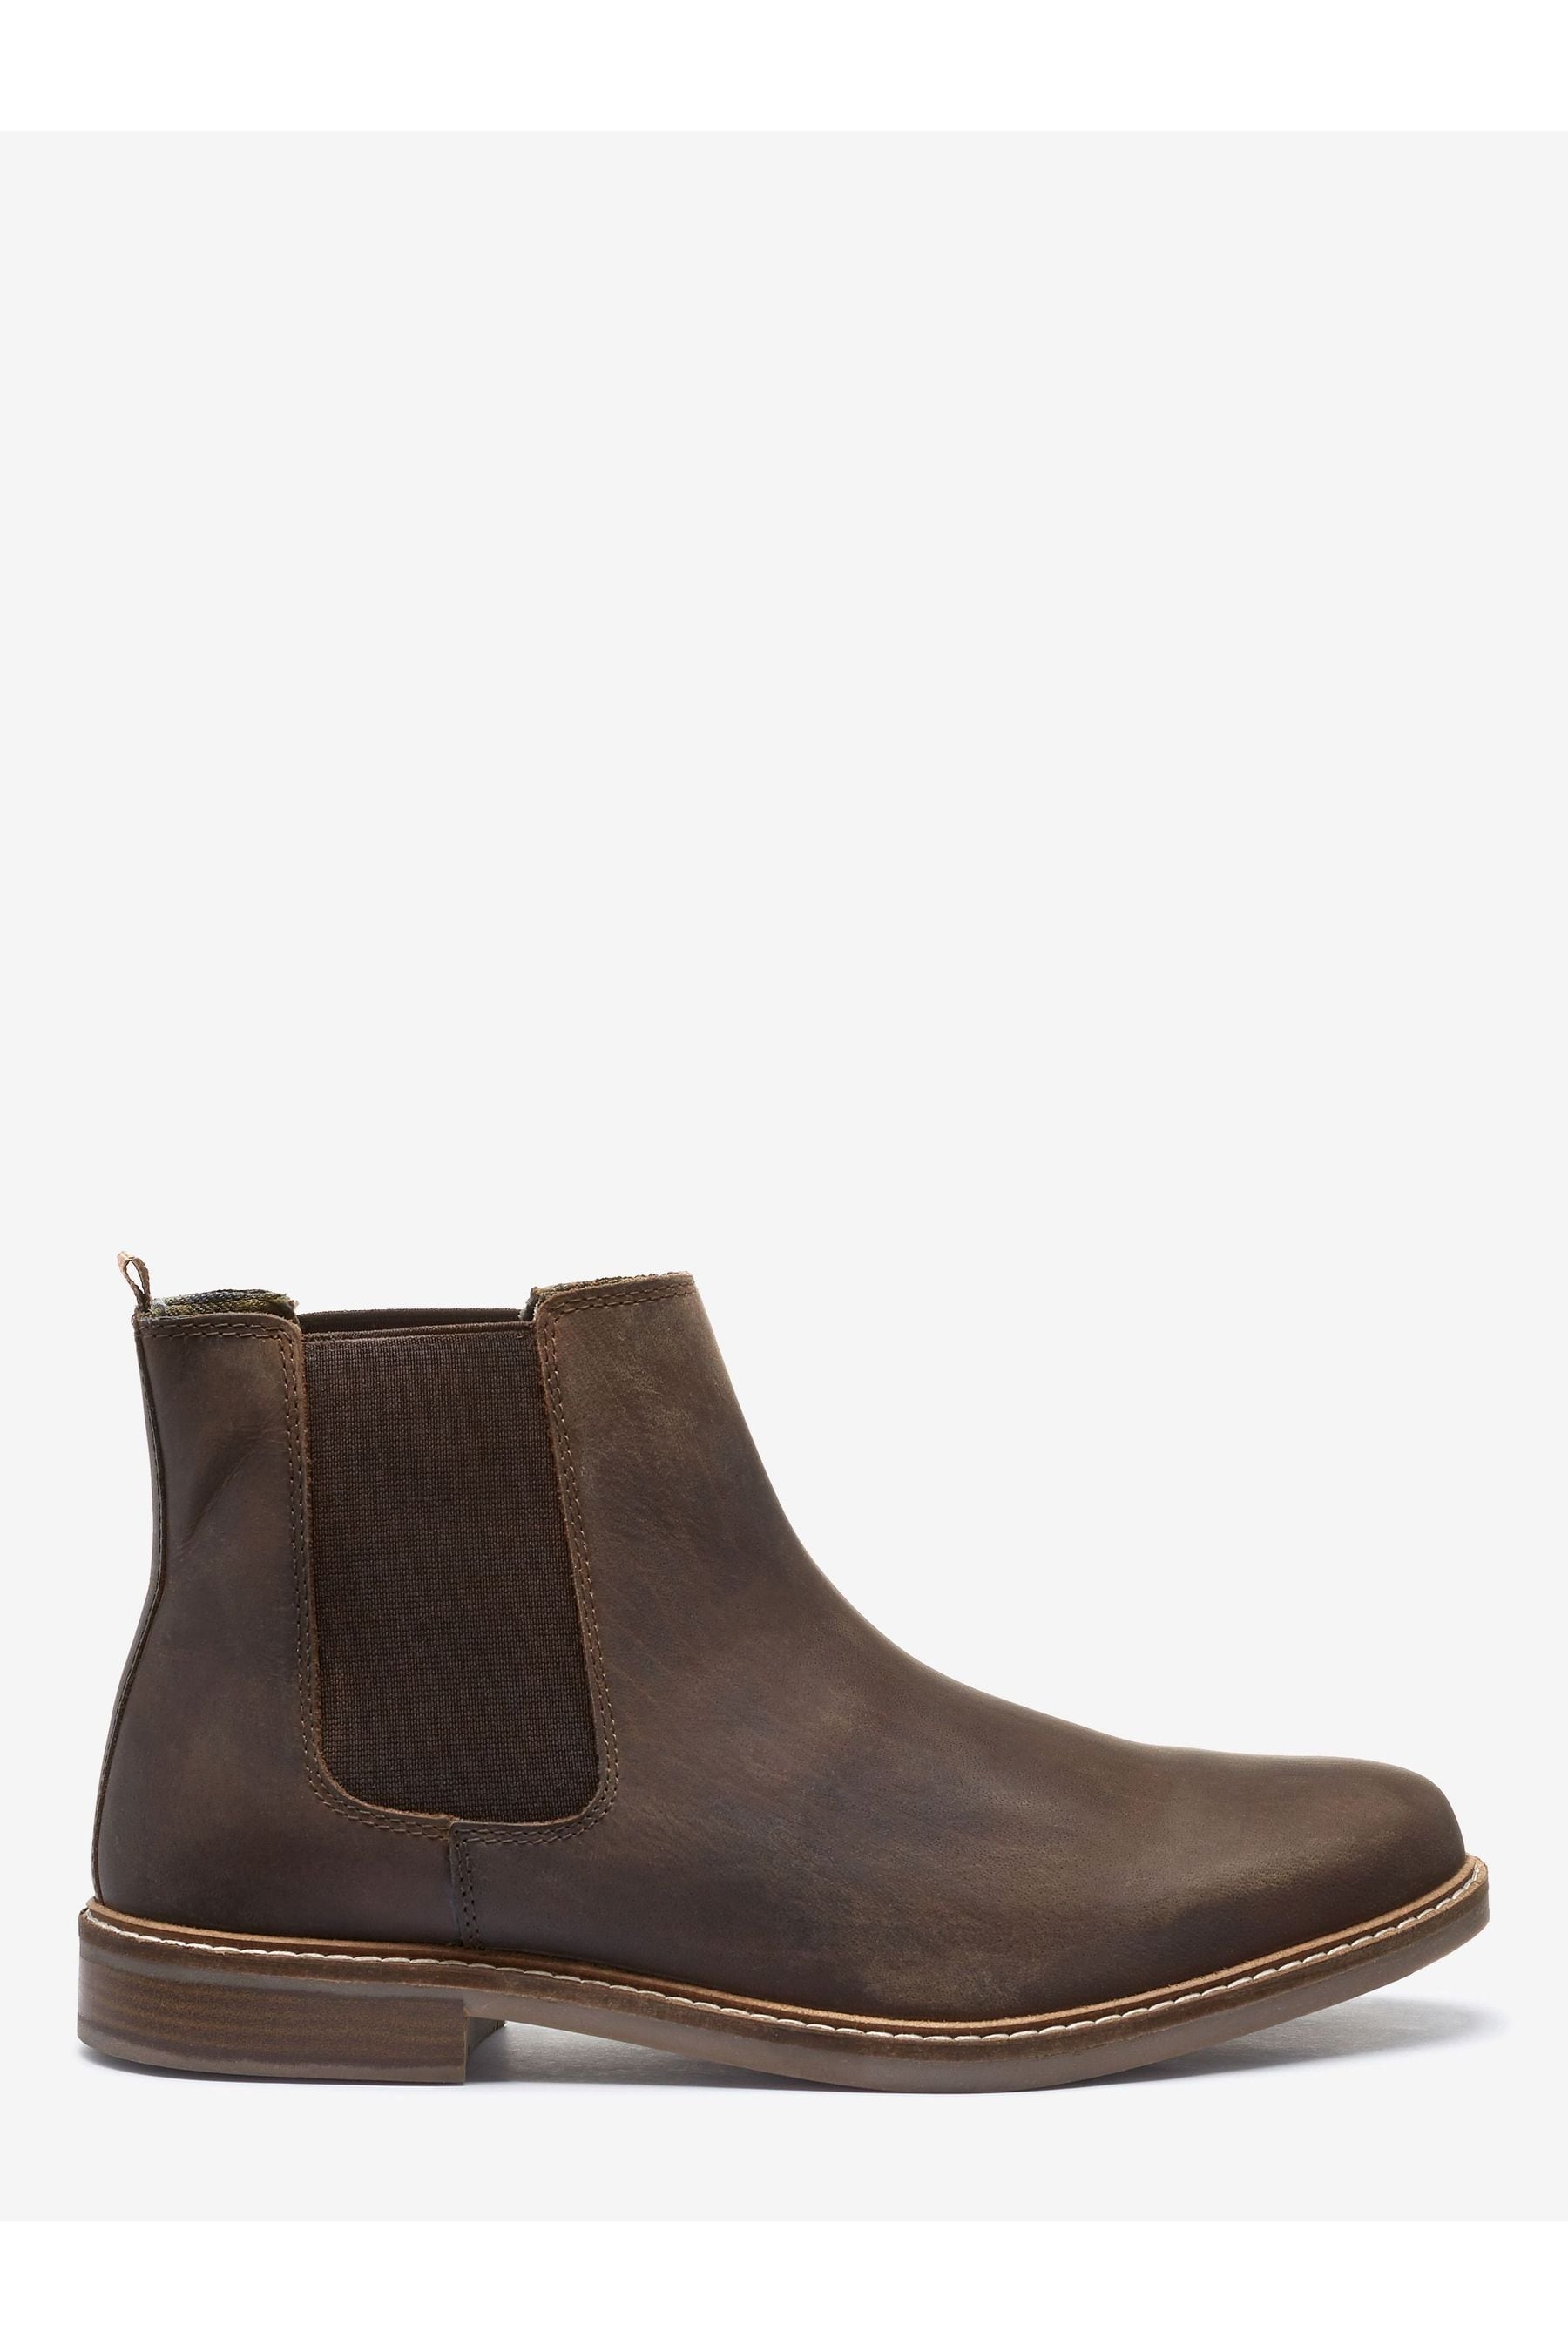 Buy Brown Waxy Finish Leather Chelsea Boots from the Next UK online shop